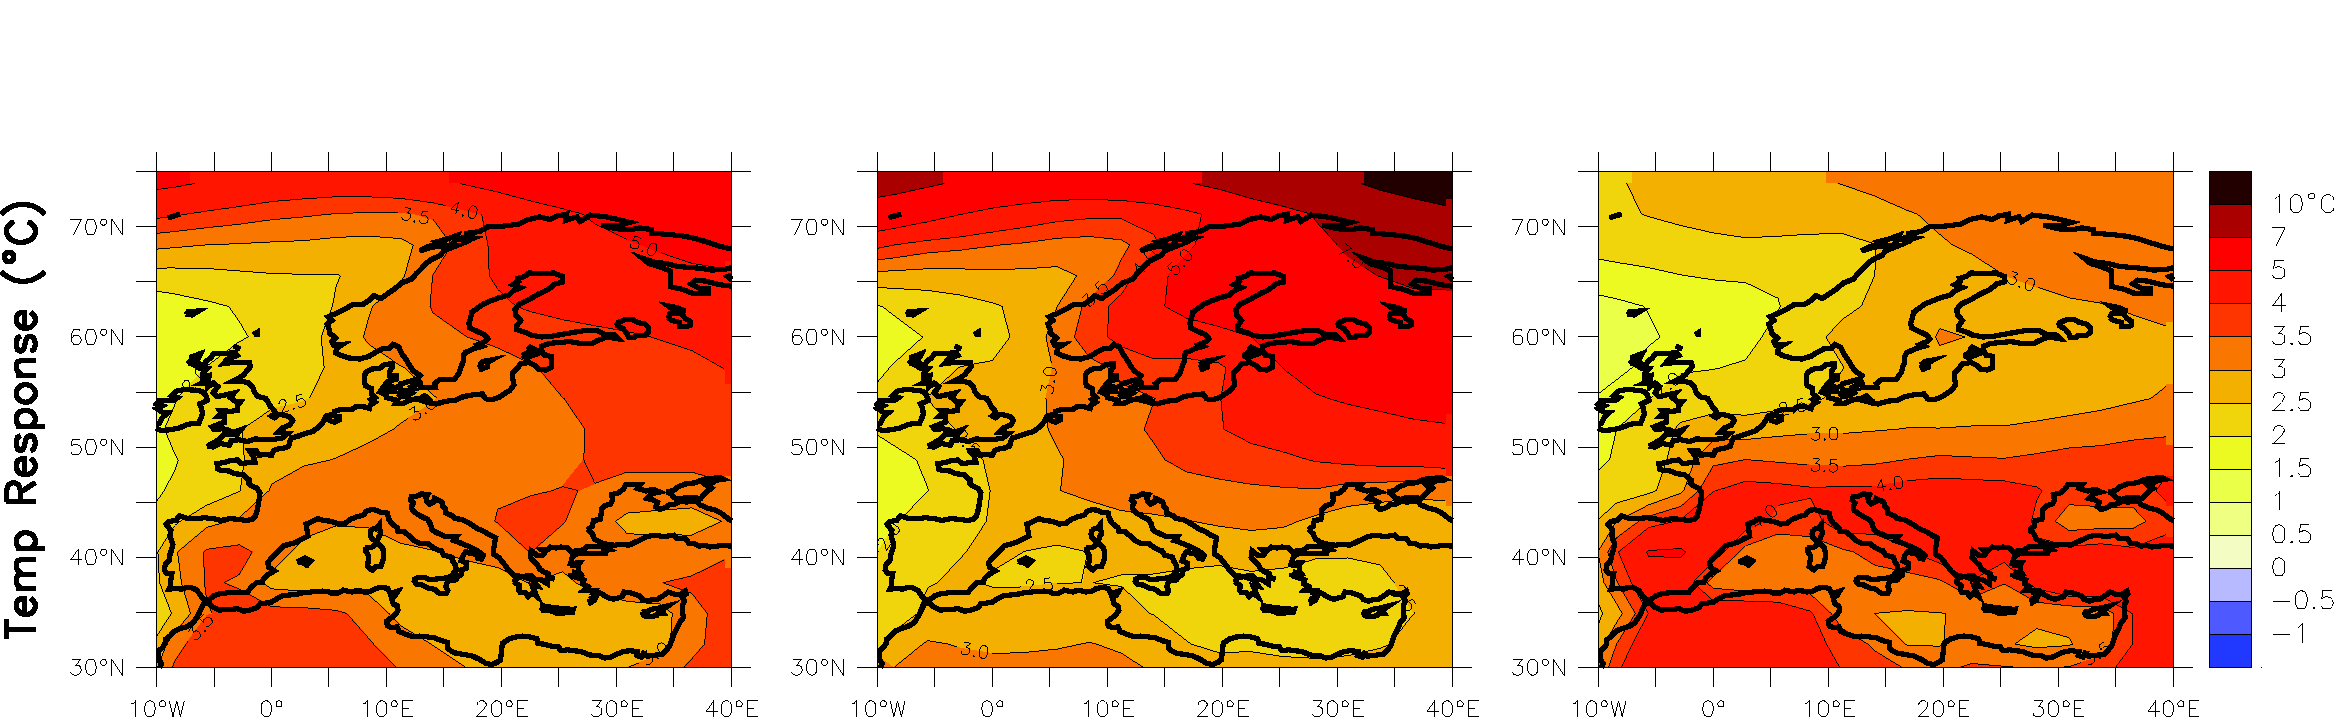 Modelled change in mean temperature over Europe between 1980-1999 and 2080-2099